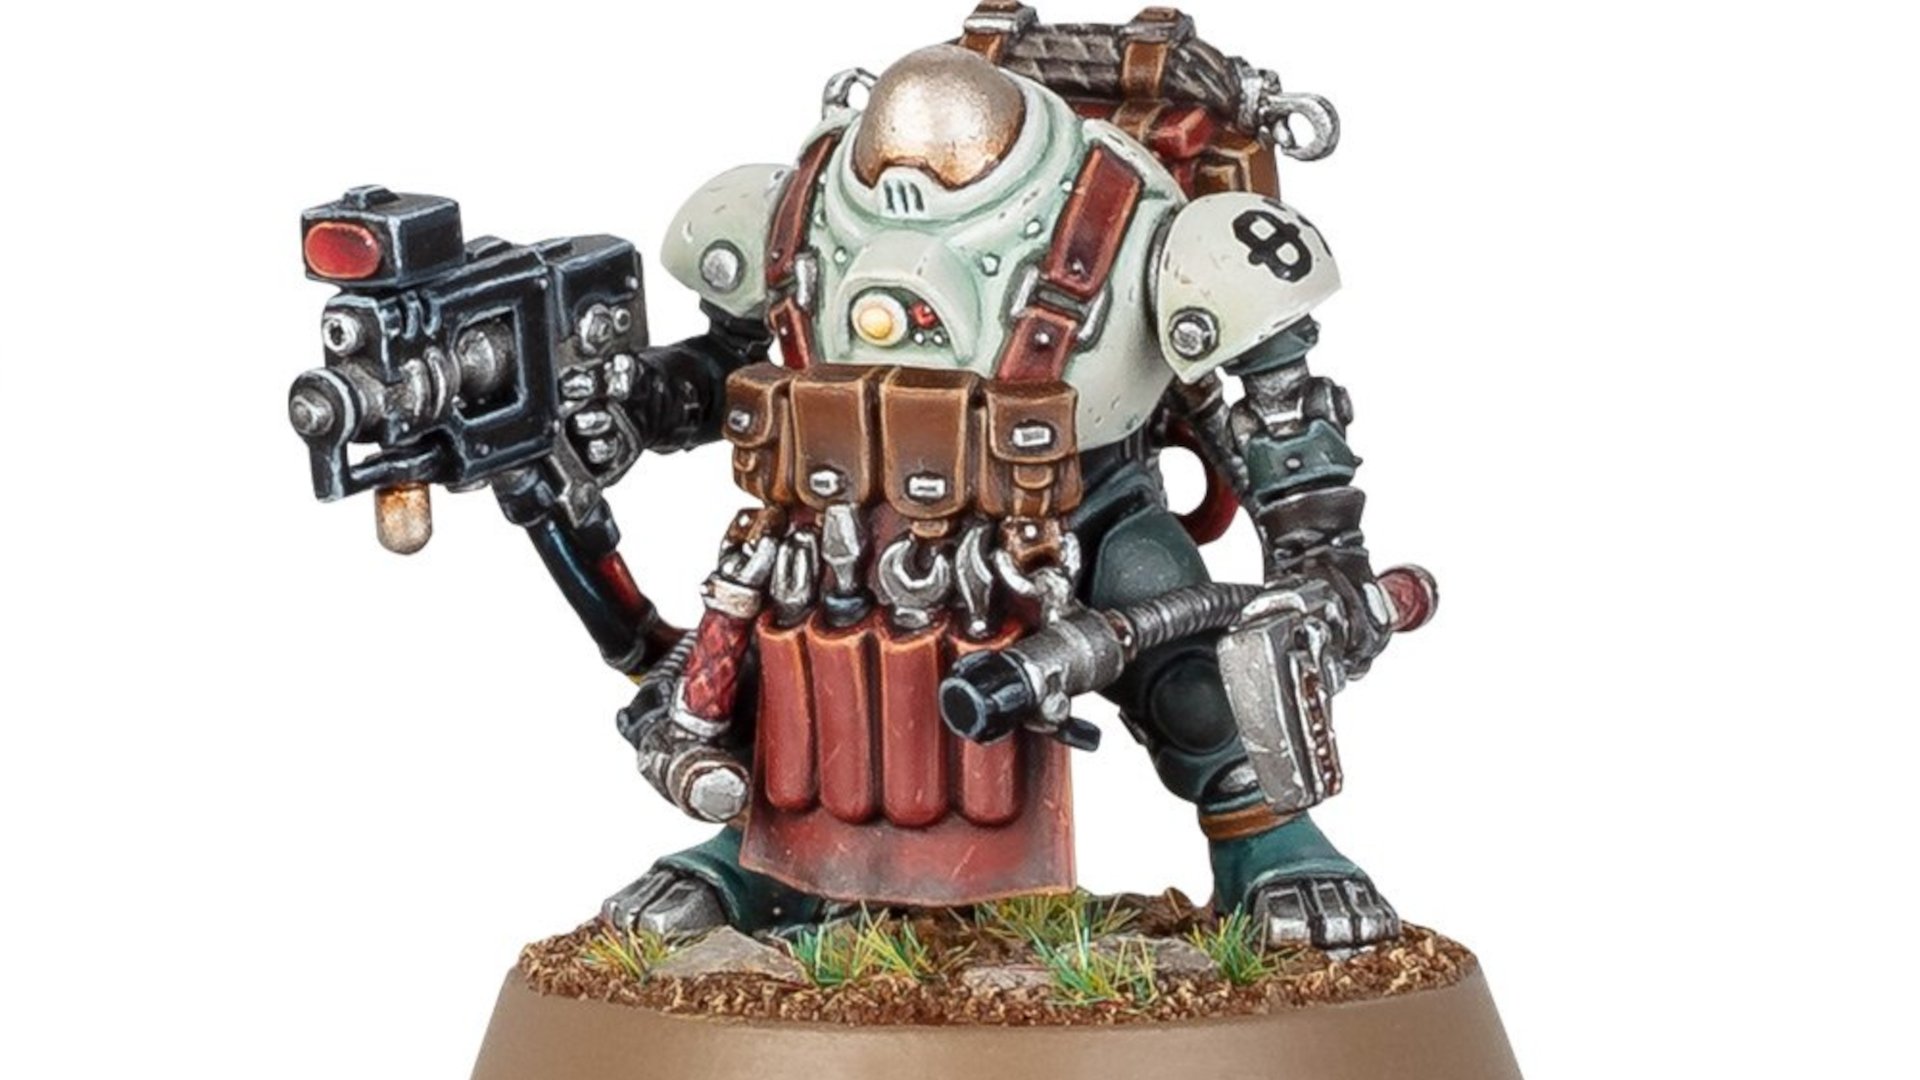 Warhammer 40k Leagues of Votann guide - Games Workshop photo showing the Ironkin Assistant model